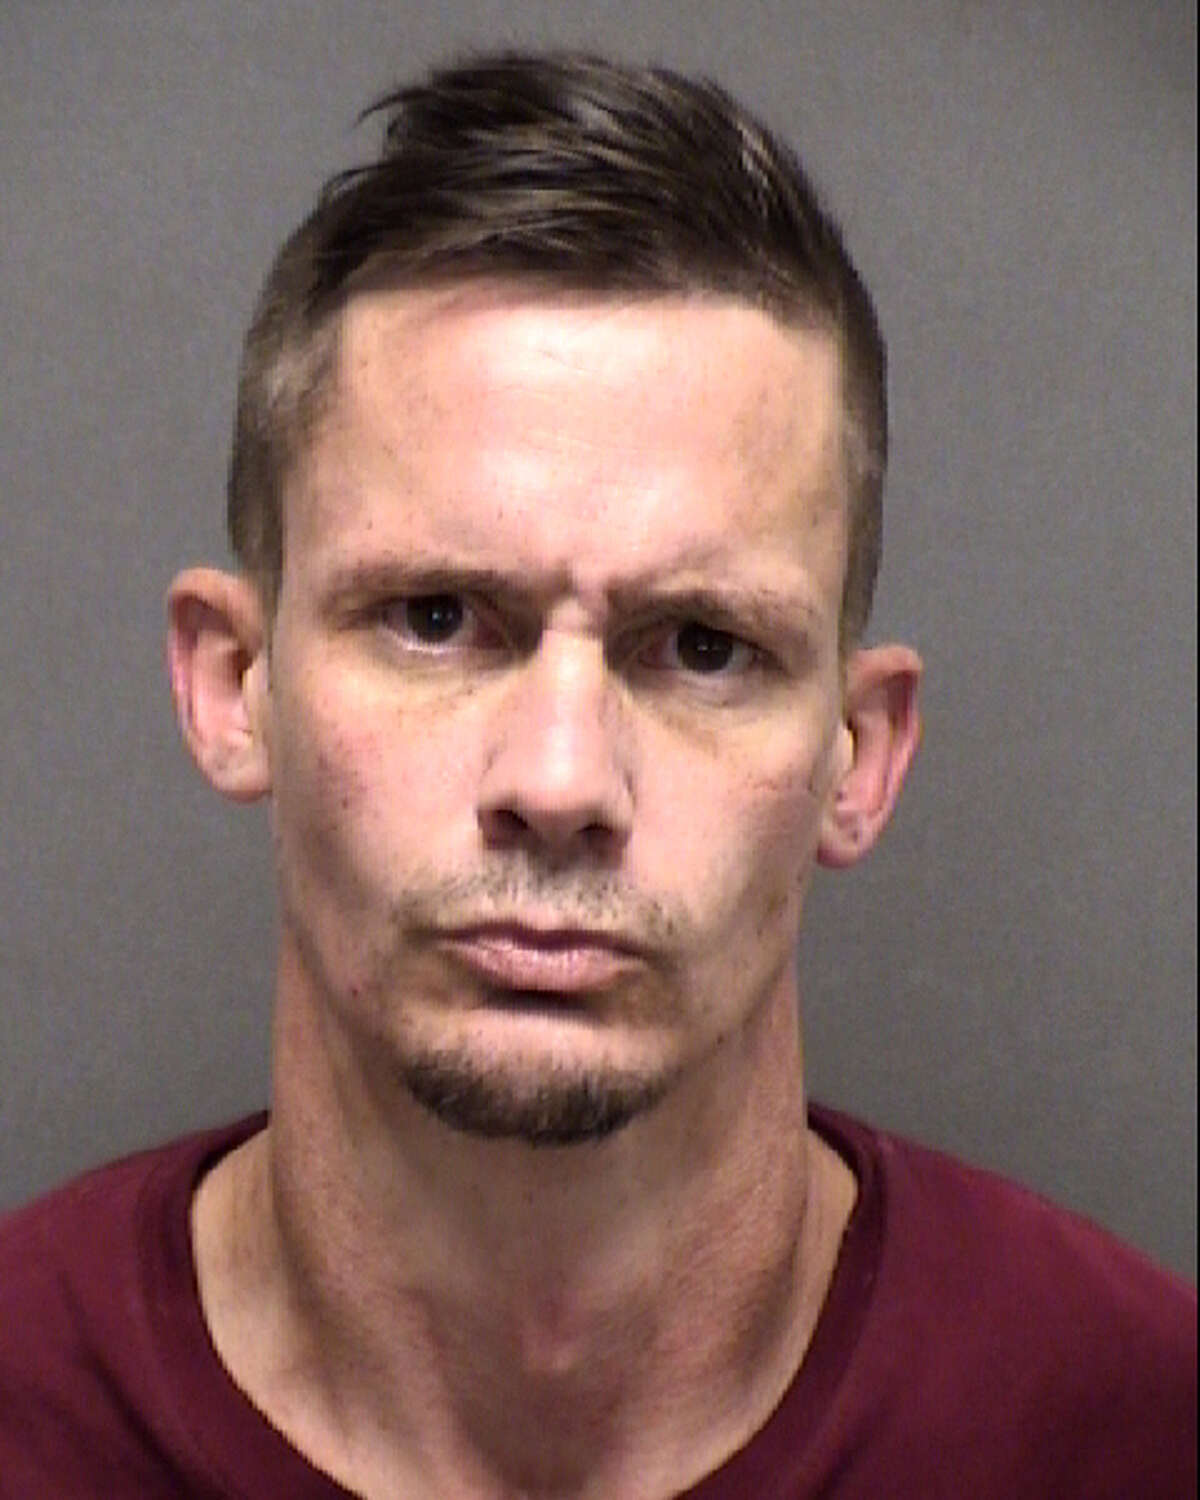 Ryan Simmons, 41, was charged with threatening a peace officer.